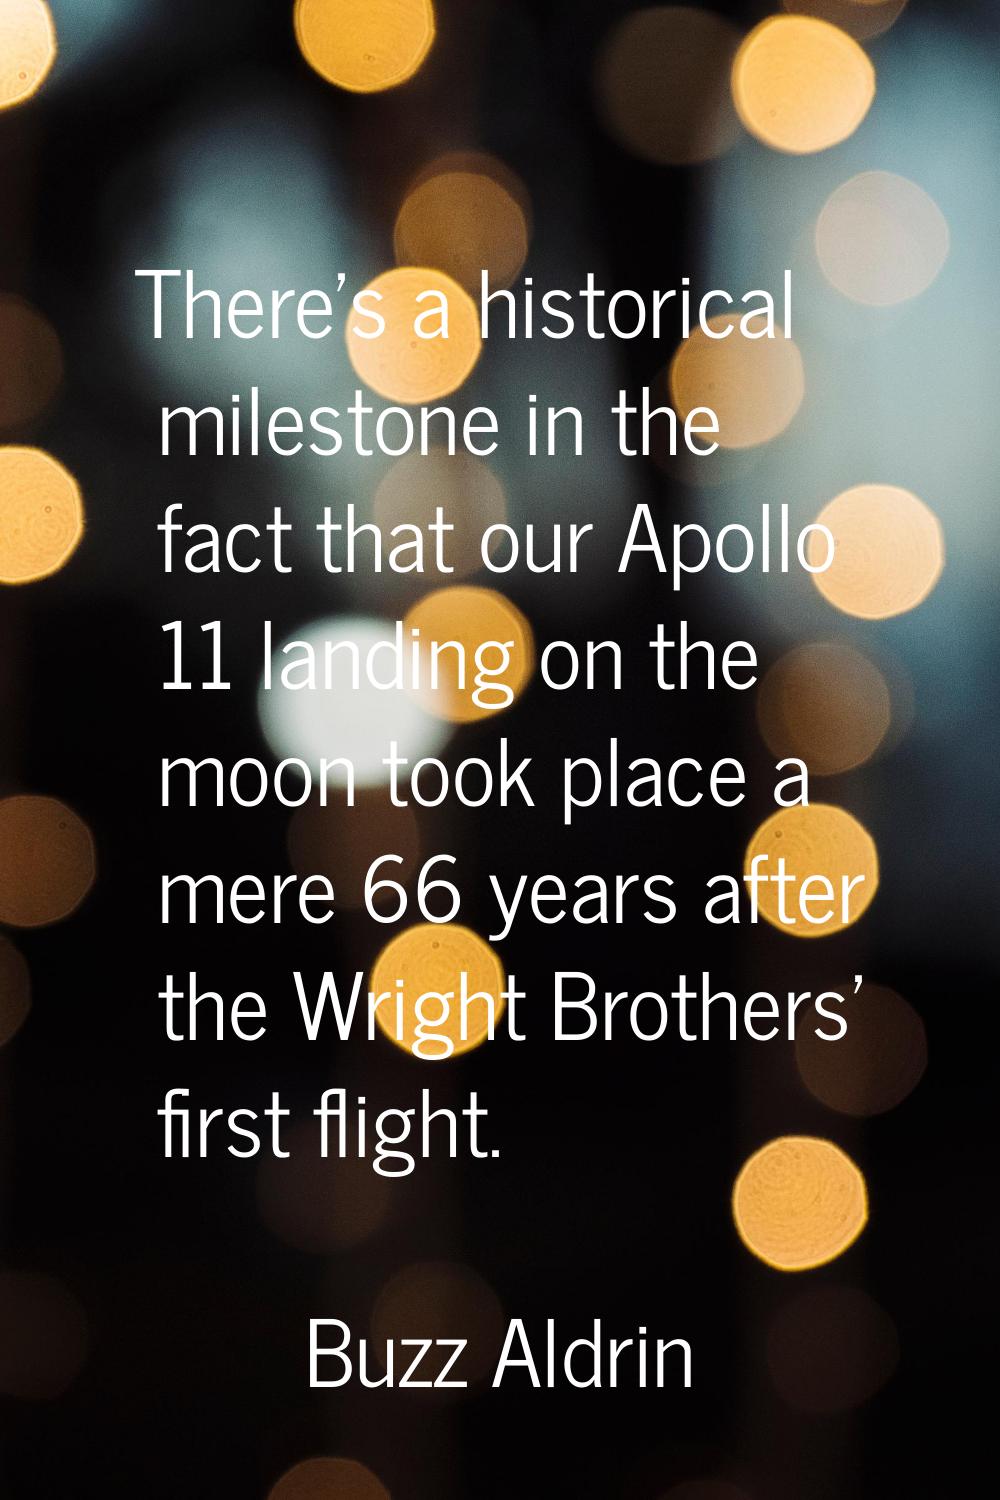 There's a historical milestone in the fact that our Apollo 11 landing on the moon took place a mere